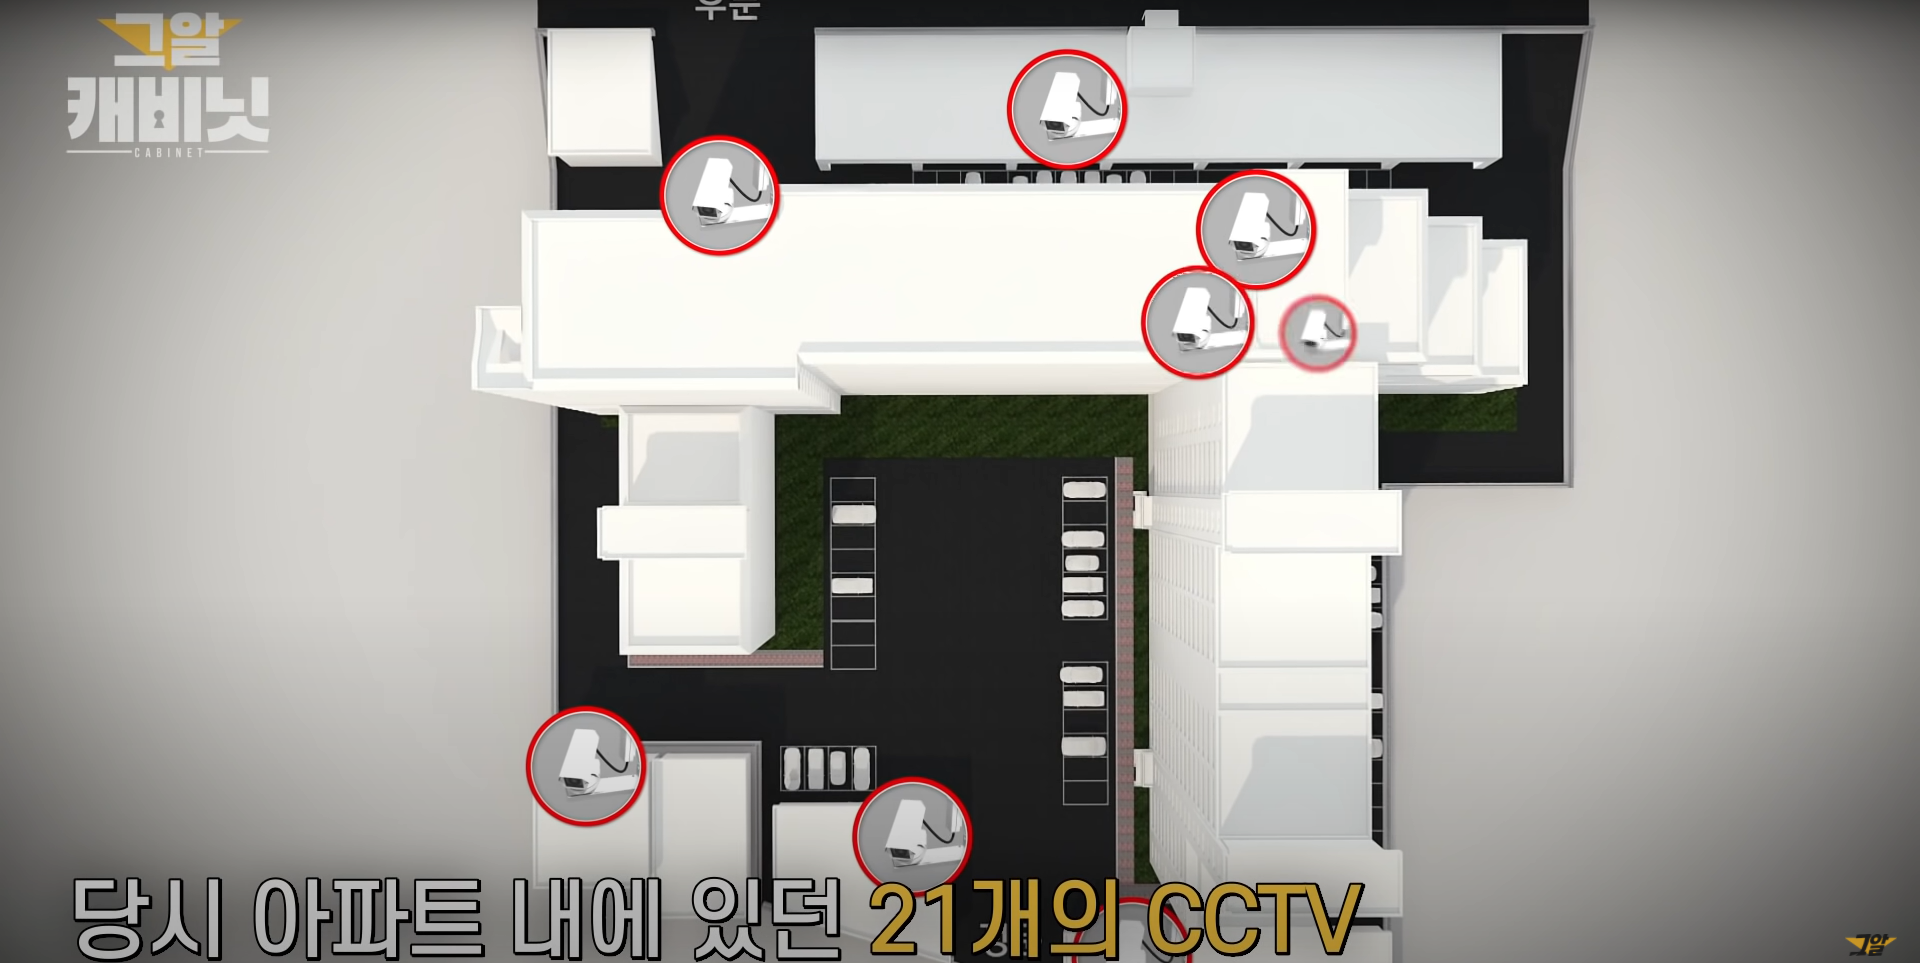 unsolved crimes in korea - cctv locations